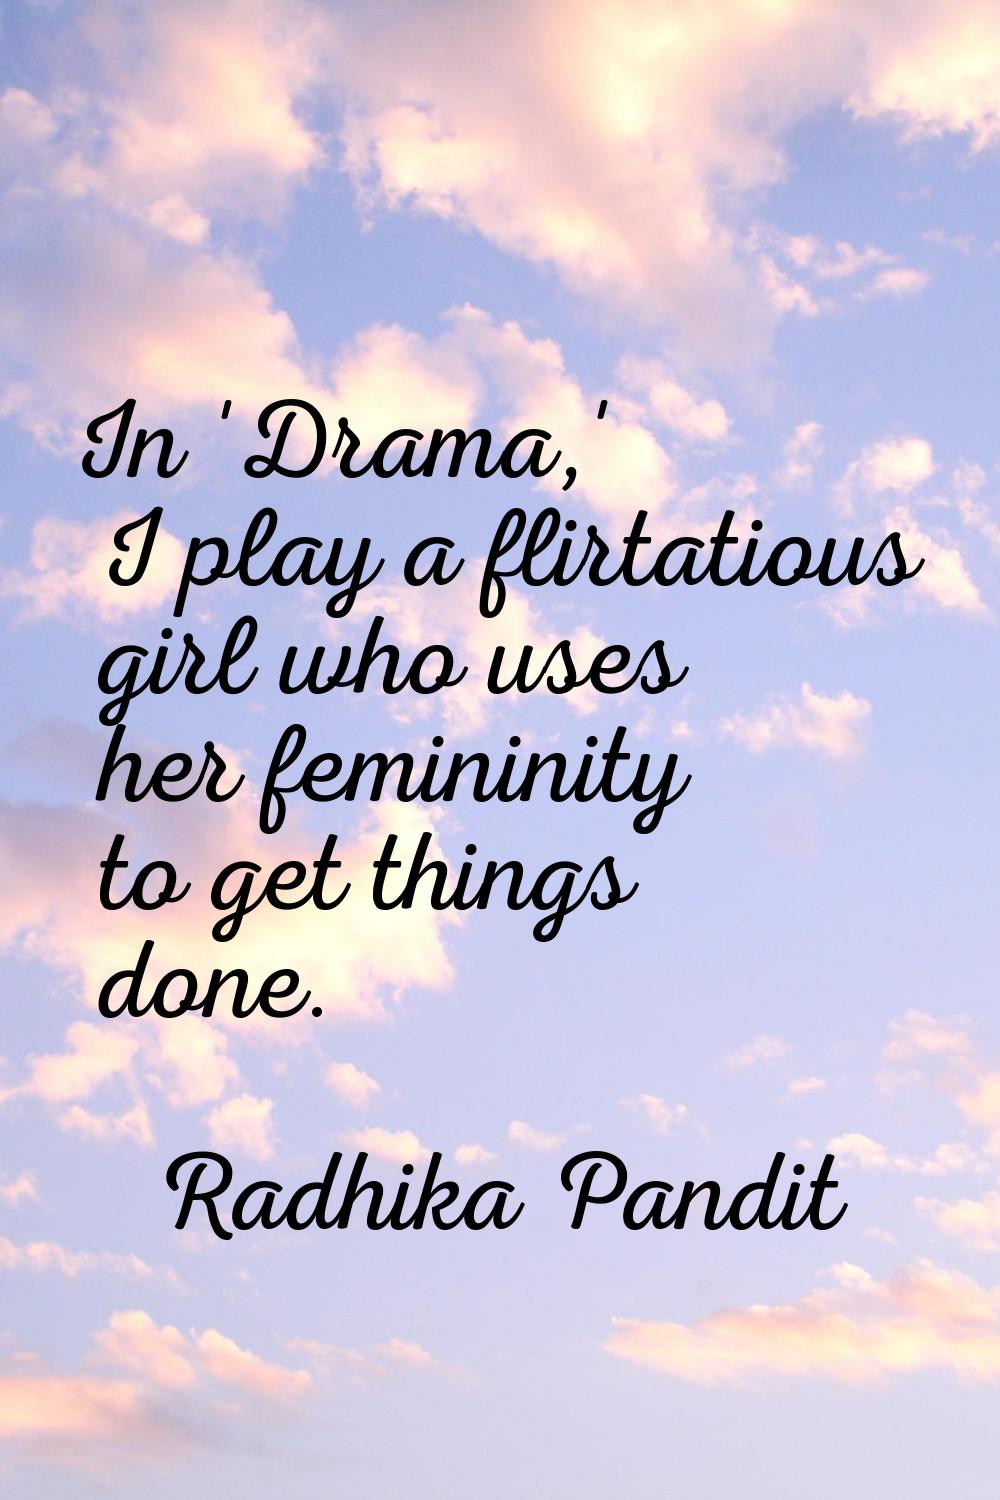 In 'Drama,' I play a flirtatious girl who uses her femininity to get things done.